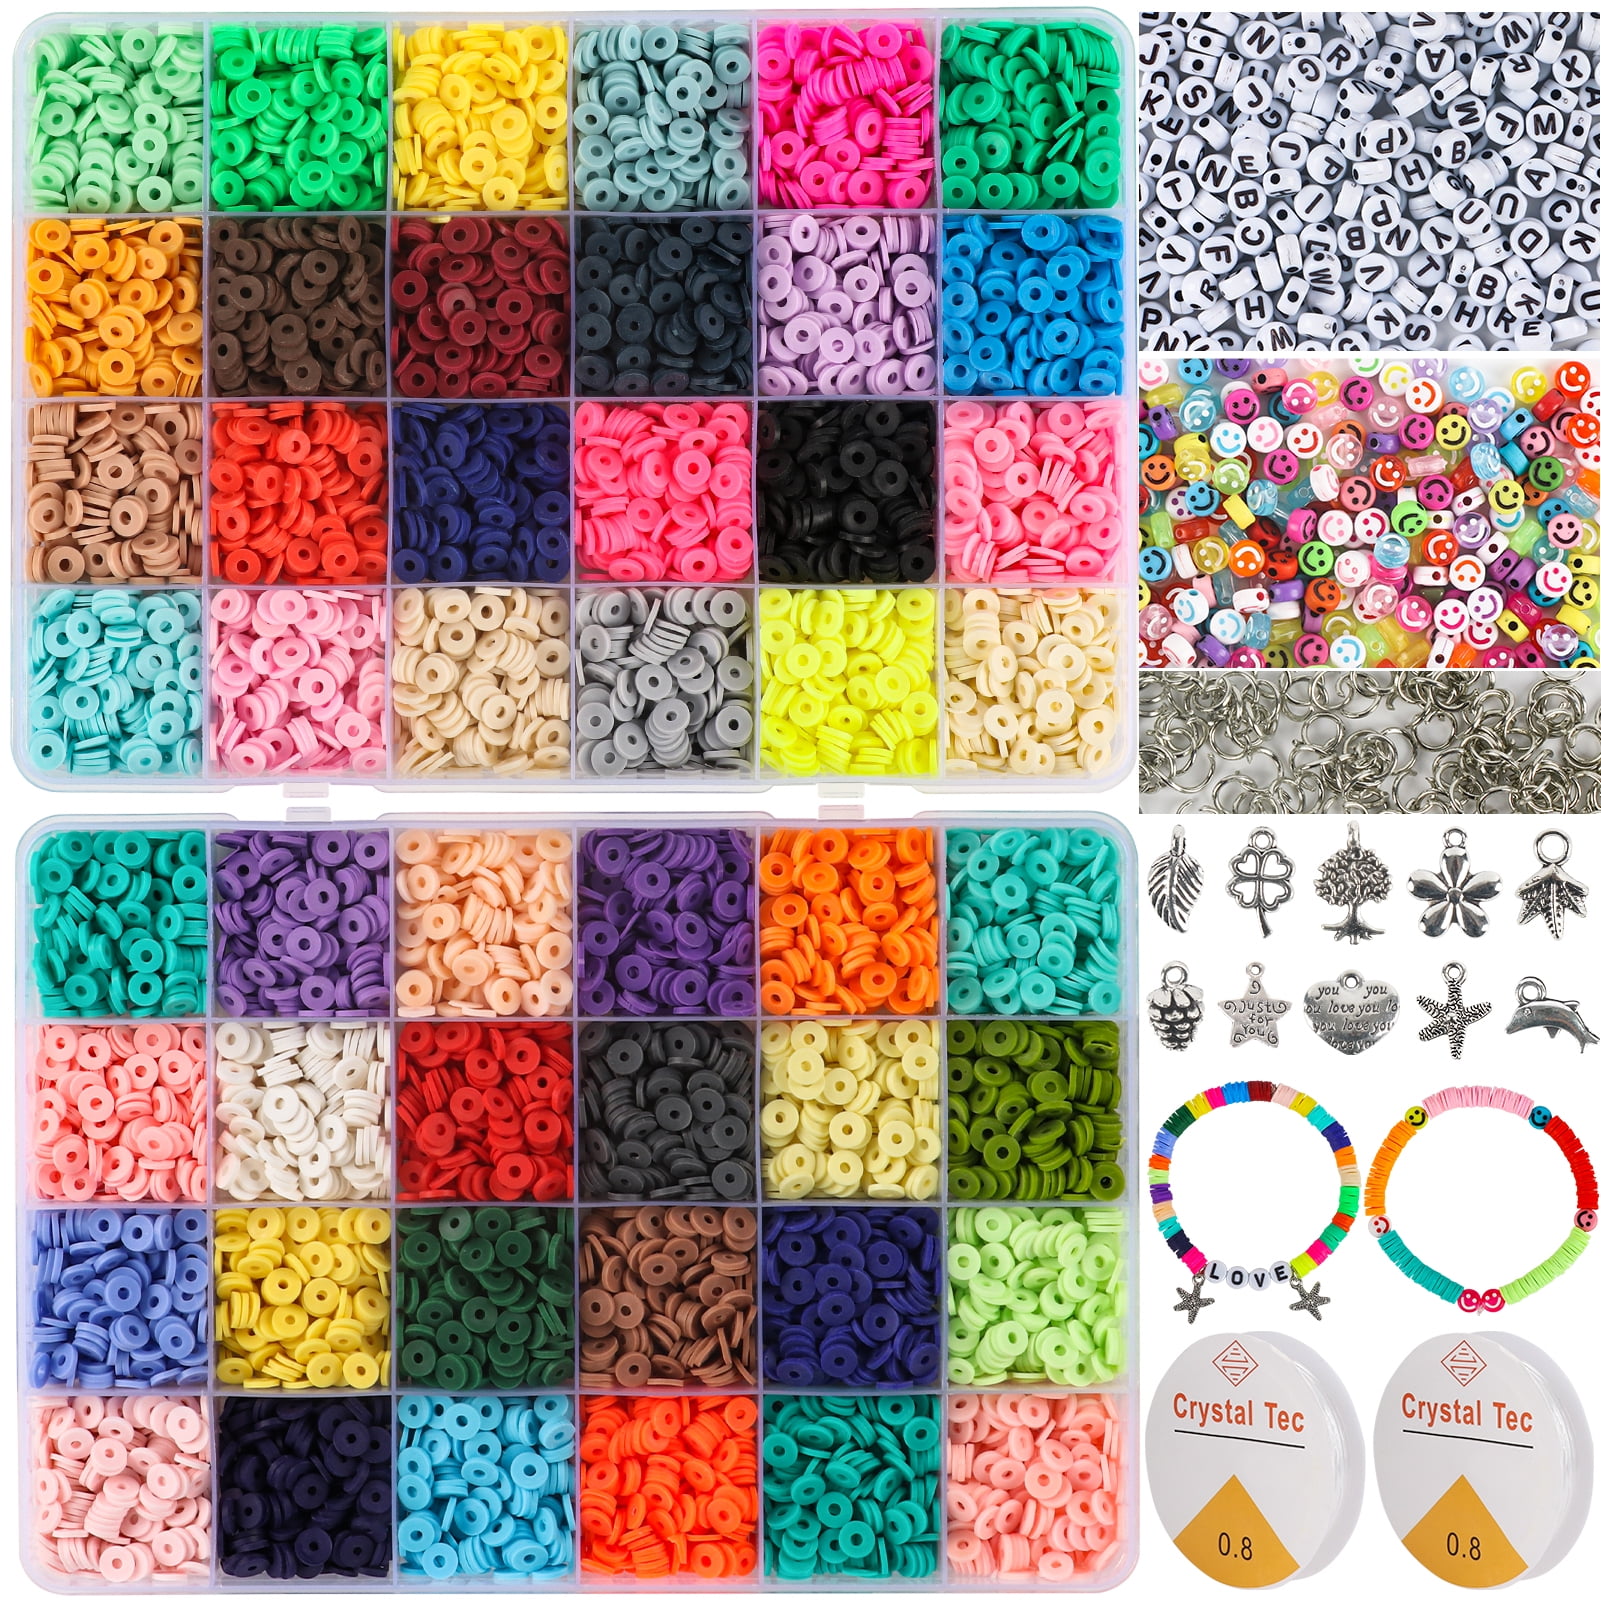 Pmbqifay 56+ Colors Clay Beads for Bracelets Making, 11788Pcs Clay Bead Kit with 28 Kinds of Speckled & Mixed Colored Beads, 6mm Heishi Beads Flat